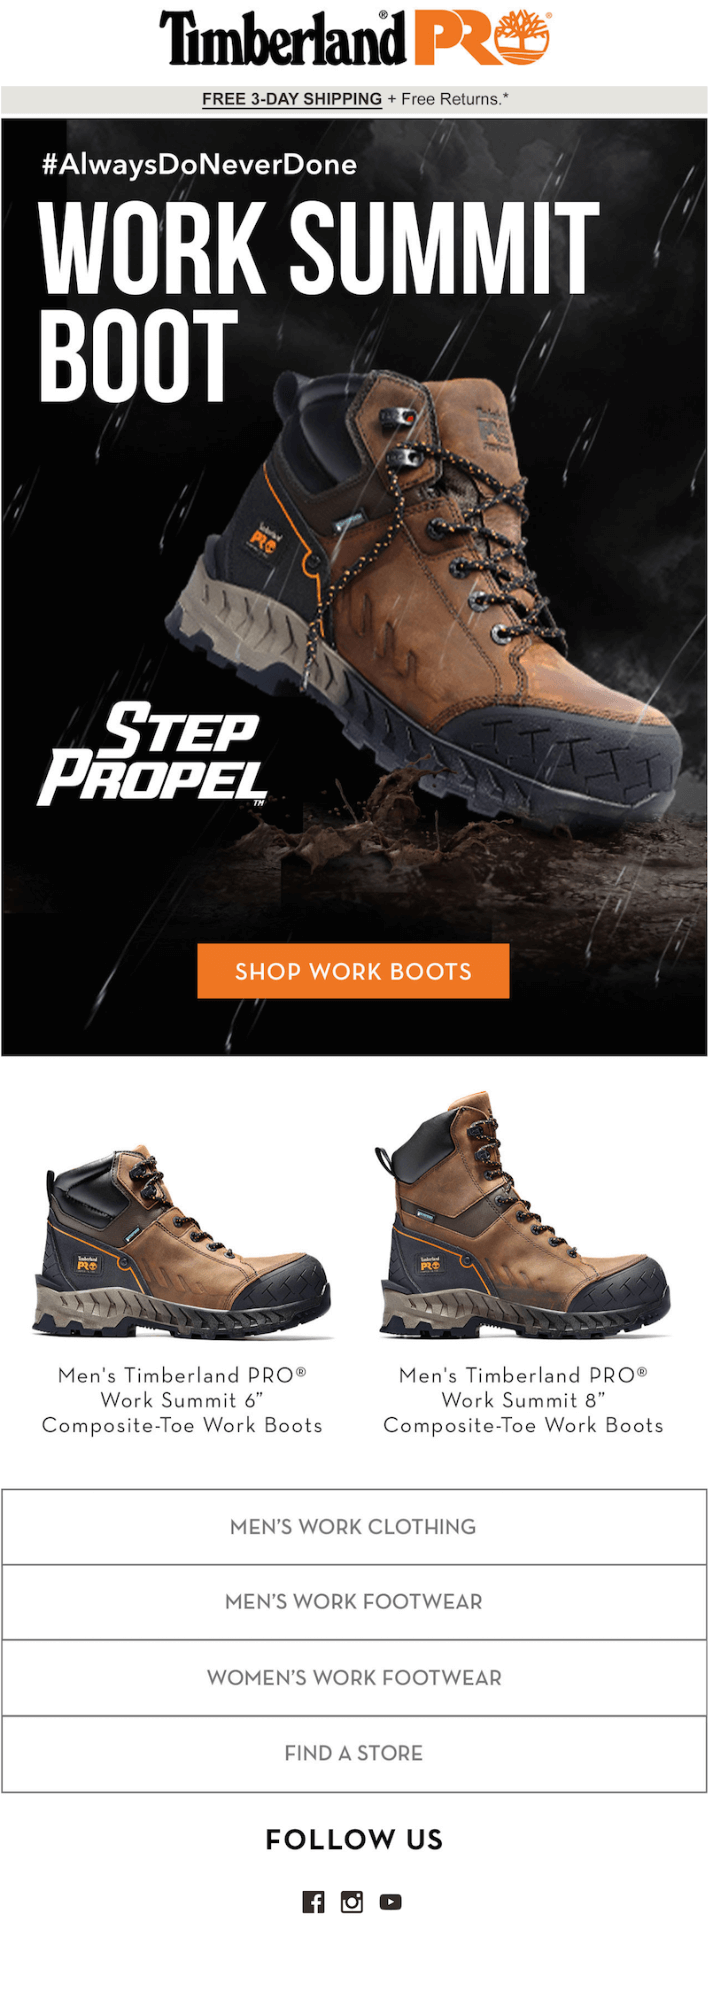 Timberland example of dynamic content in emails